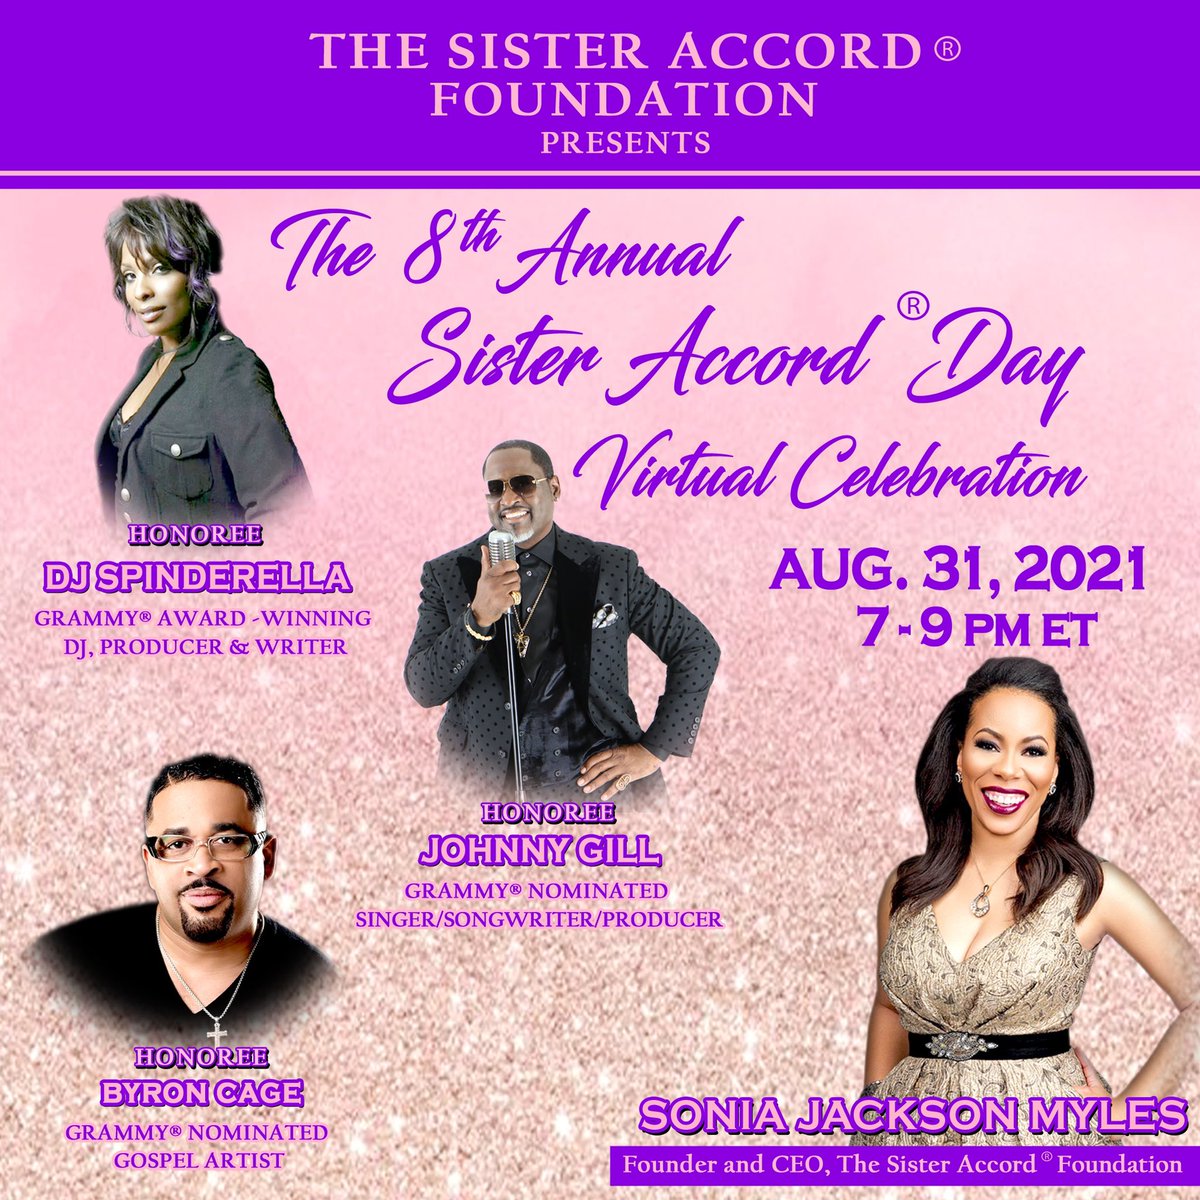 I am so excited to join my Sister, Sonia Jackson Myles @thesisteraccord for her 8th Annual Sister Accord Day Celebration. We will celebrate LOVE, Sister & Brotherhood on this day. I'm honored to receive The Sister Accord Leadership Award & perform for this very special occasion.